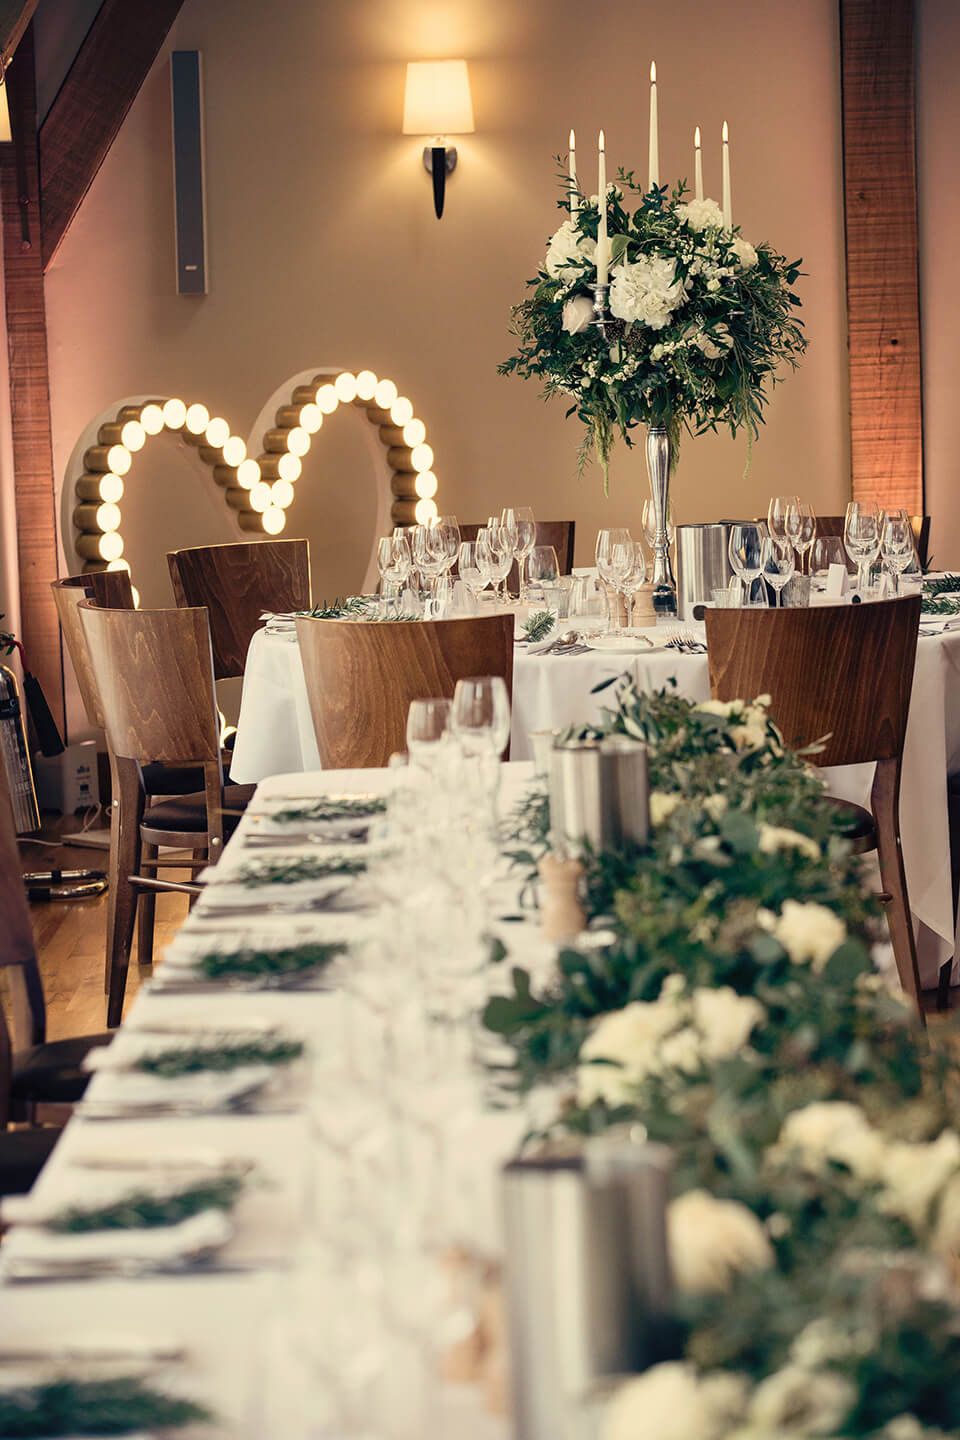 White and green florals adorn tables for an elegant wedding breakfast at Bassmead Manor Barns